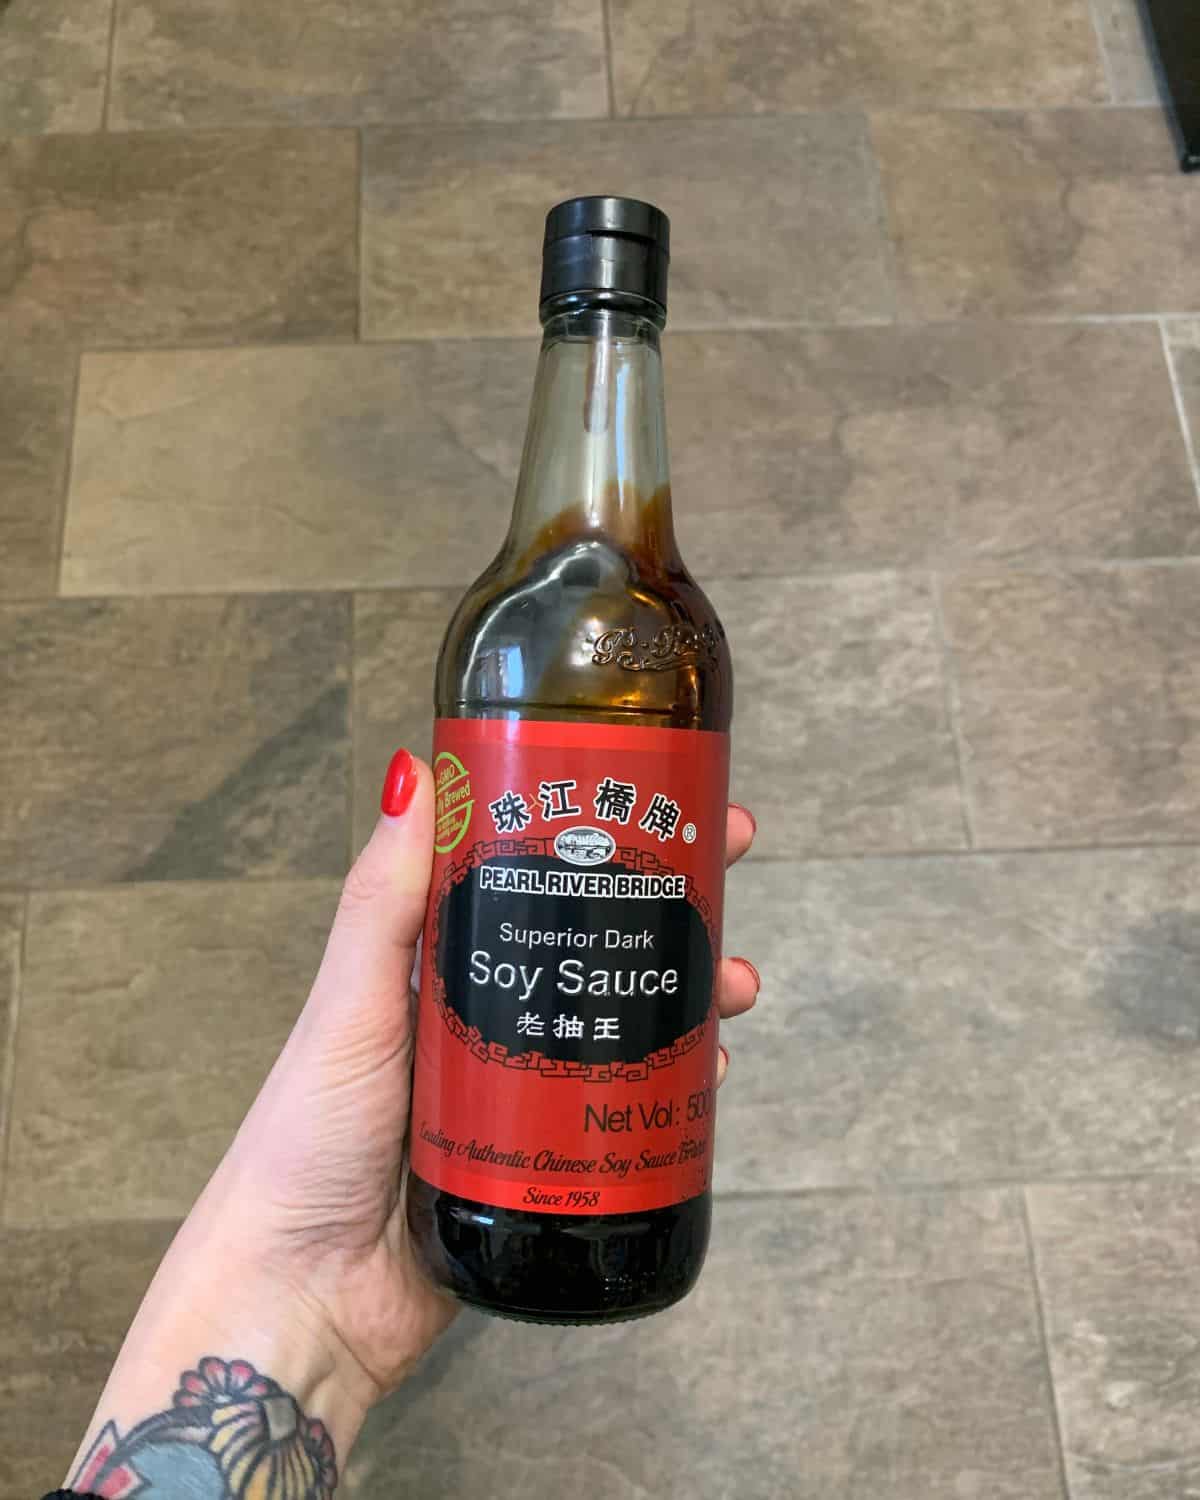 A bottle of Superior Dark Soy Sauce.